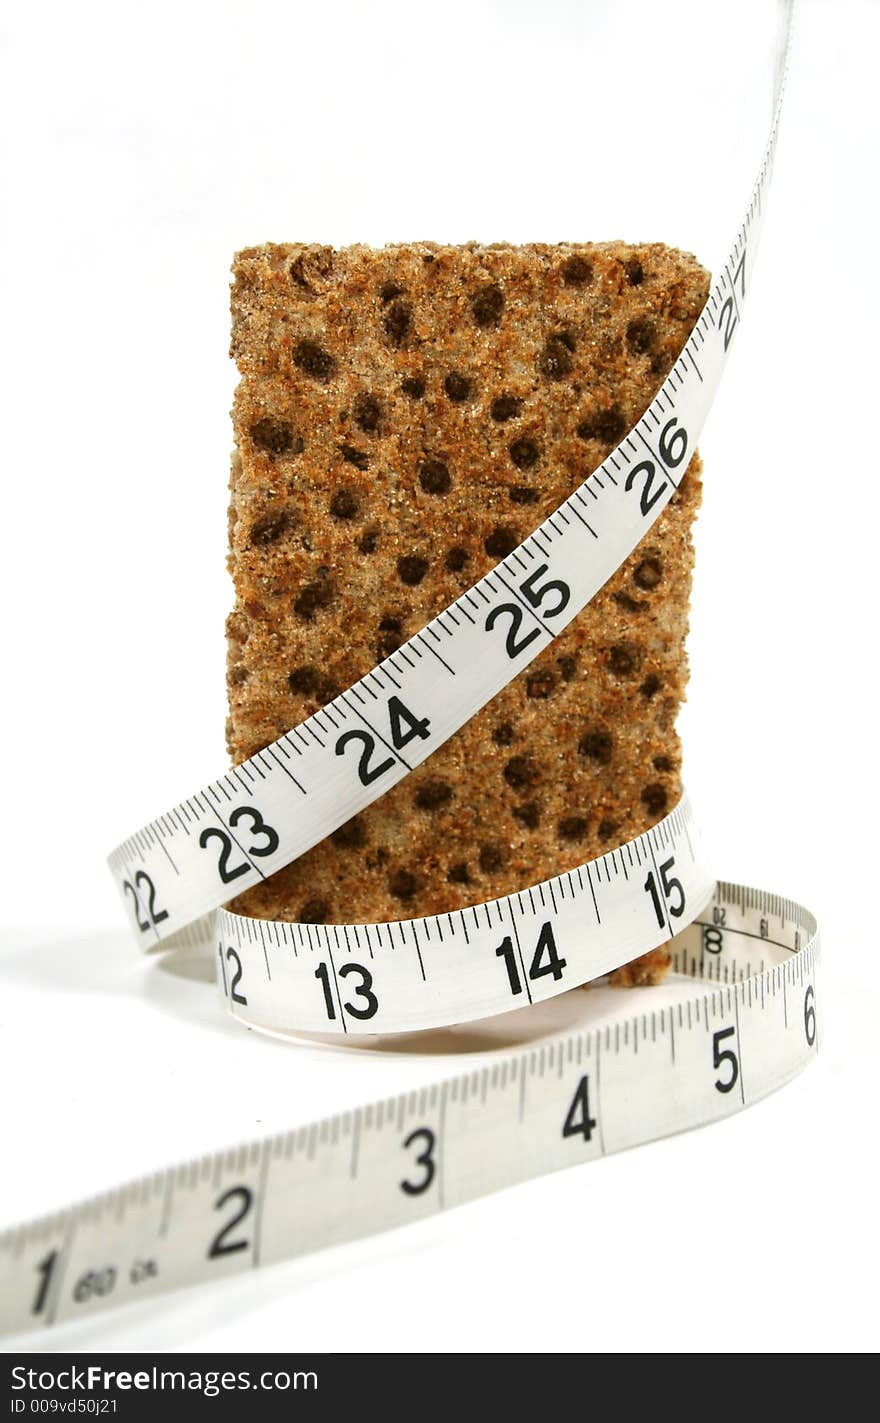 Low calorie rye cracker wrapped in a tape measure. Low calorie rye cracker wrapped in a tape measure.